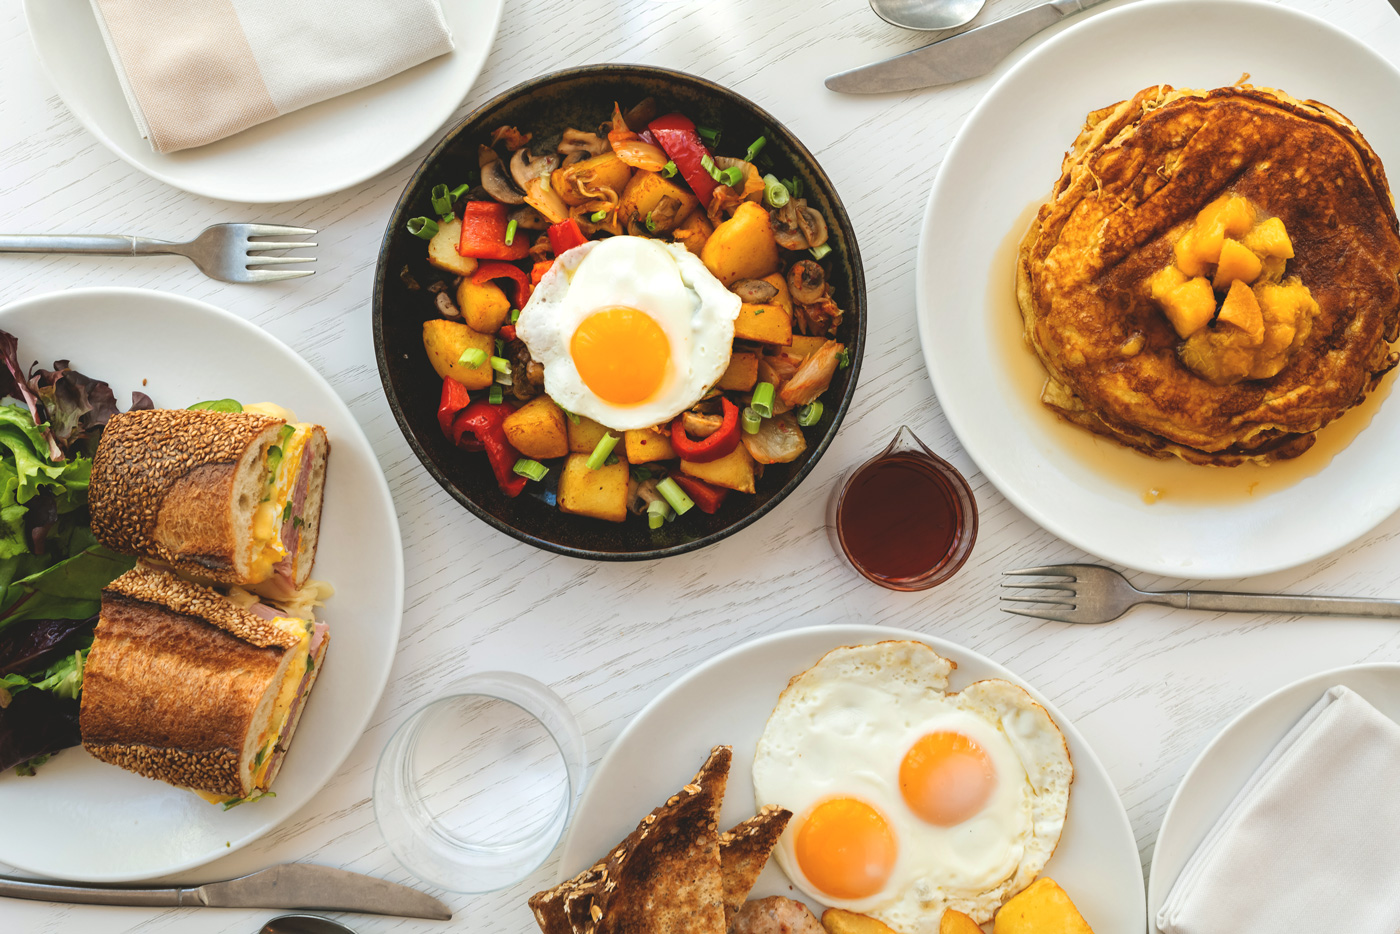 A table filled with various breakfast dishes